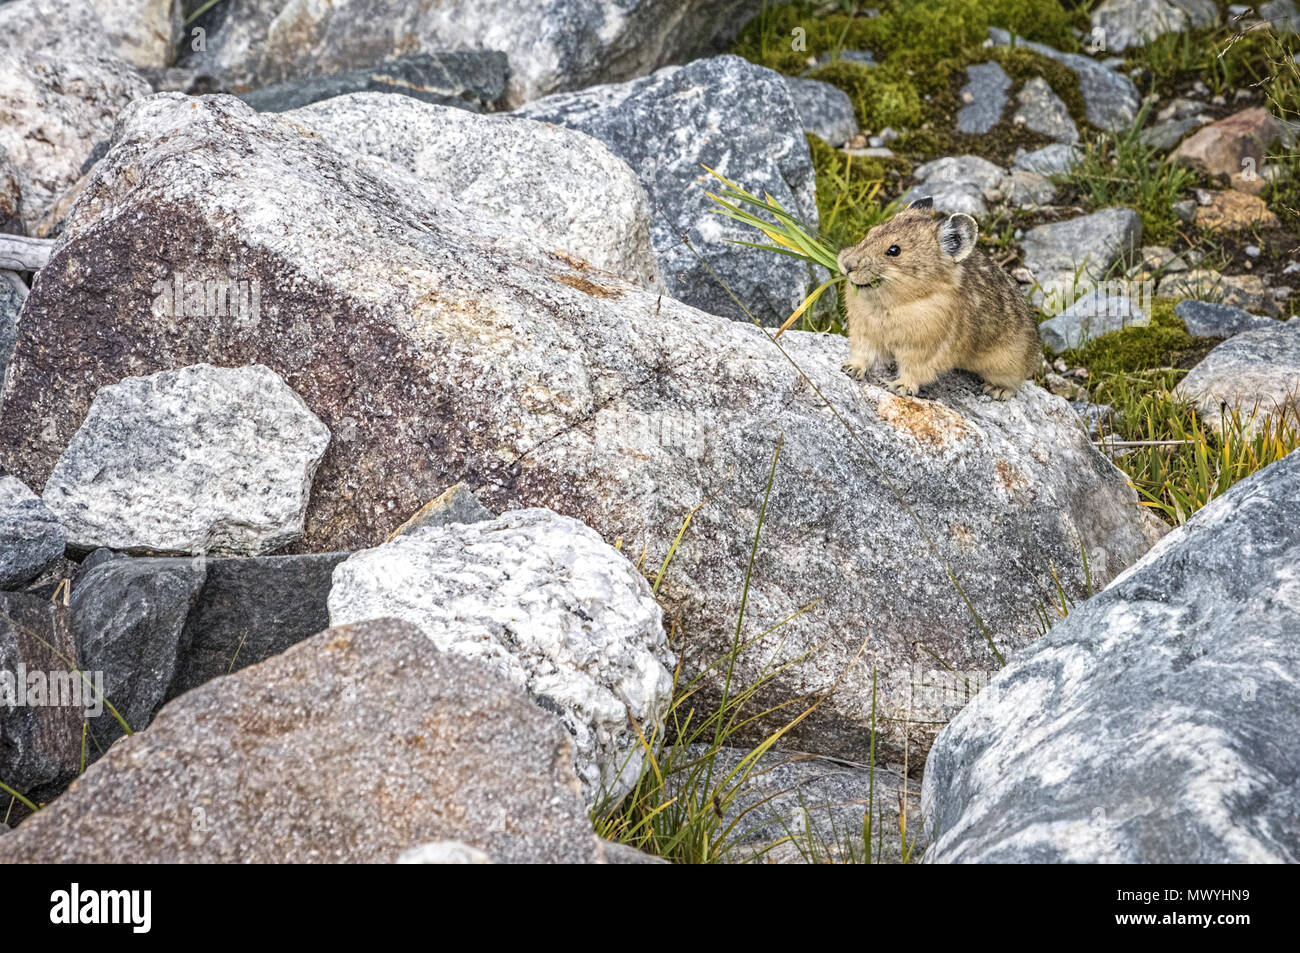 An American Pike or Rock Rabbit eating grass in the Rocky Mountains in Colorado, United States. Stock Photo